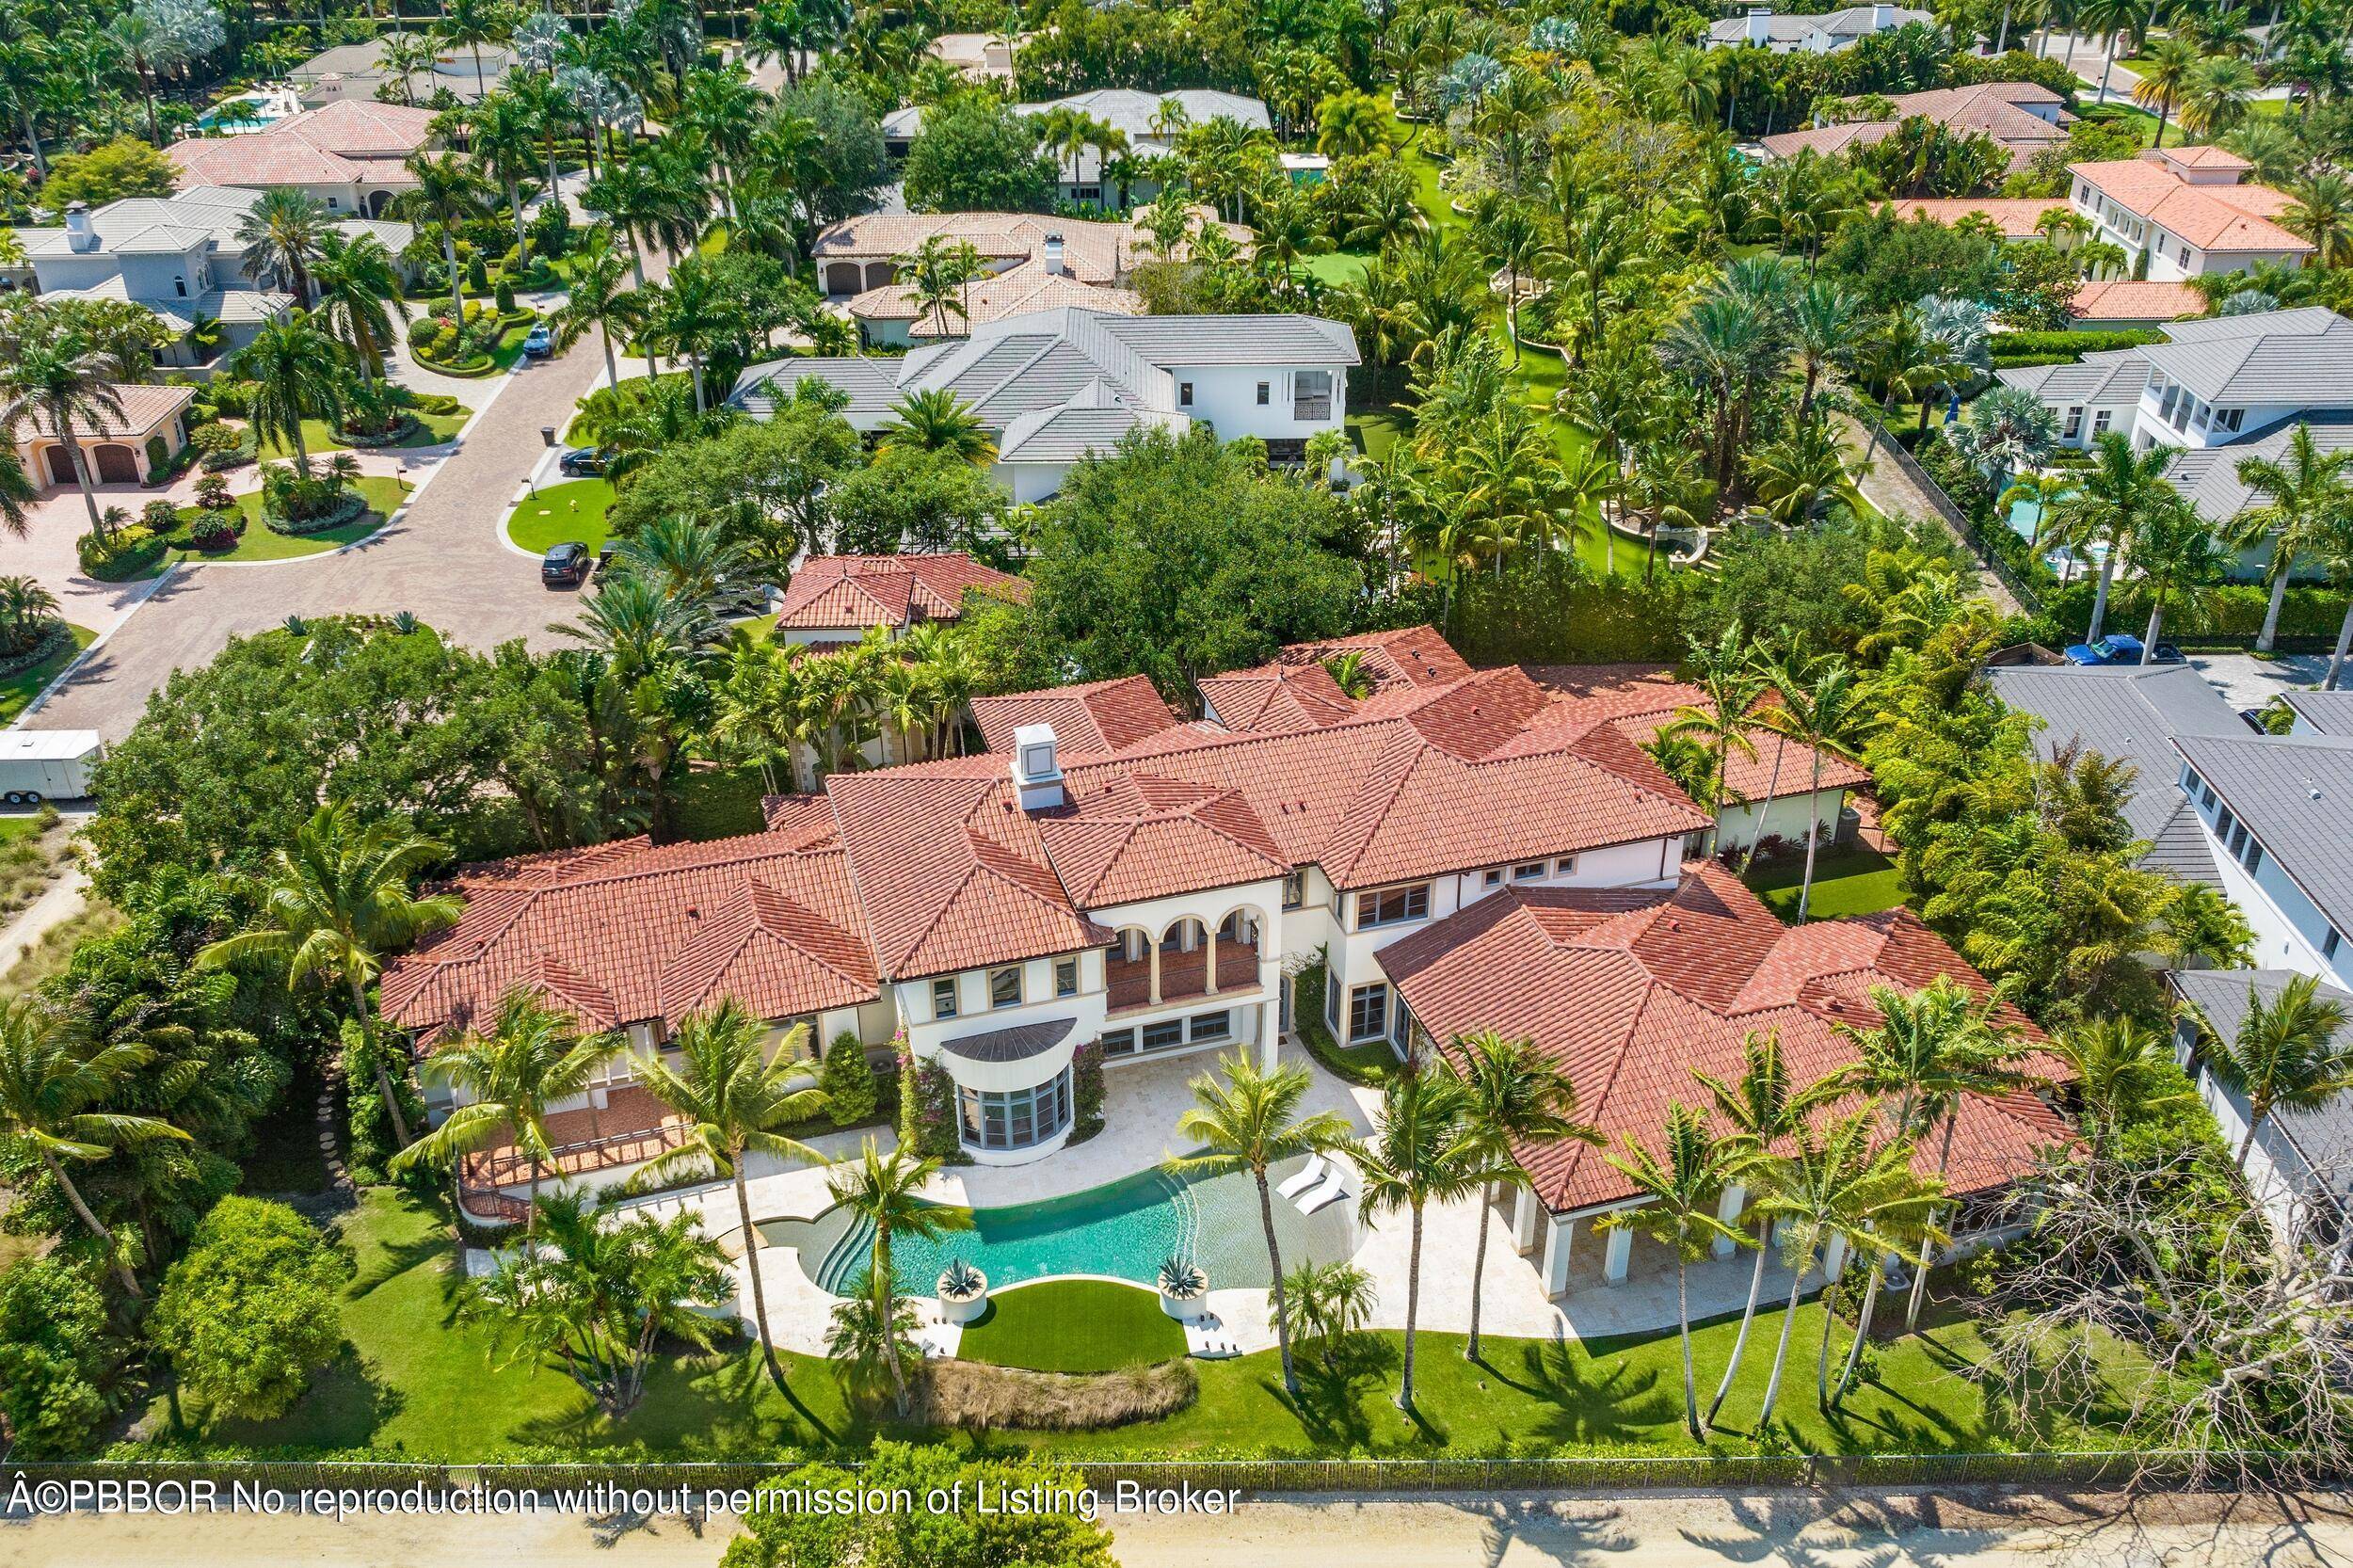 Nestled within the sought after Old Palm Golf Club, 11759 Elina Court sits on a prime 0.